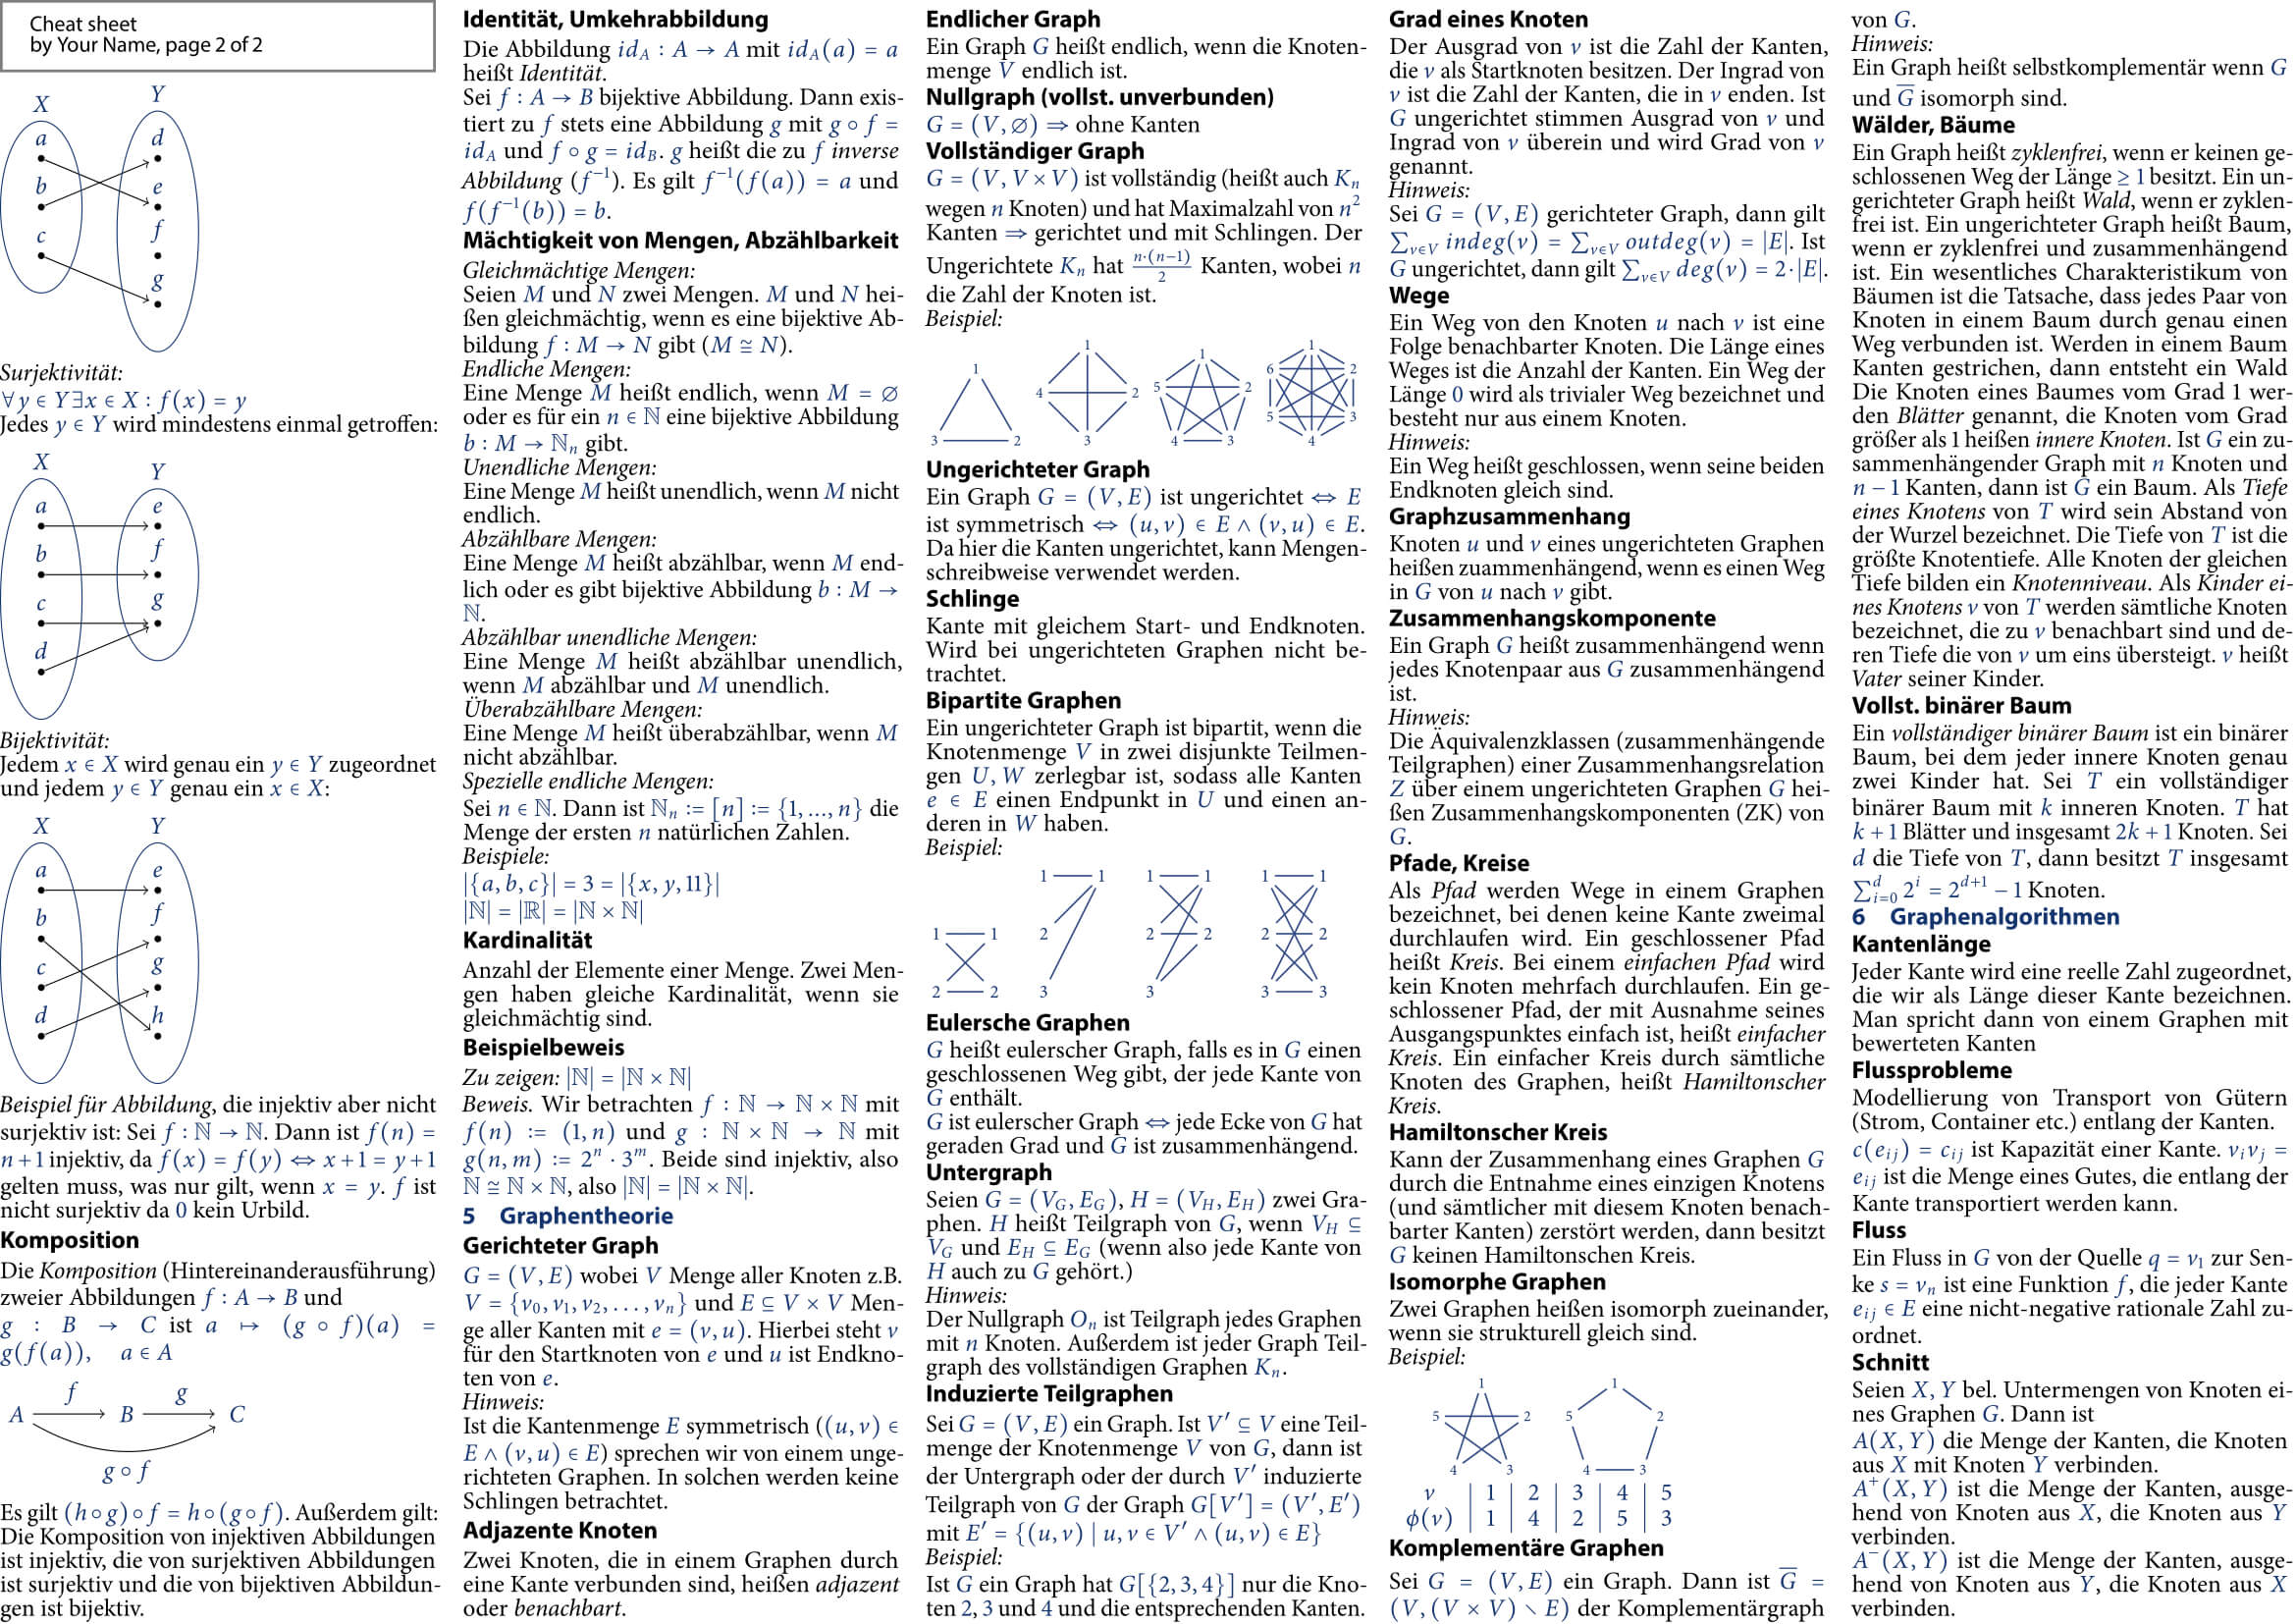 How To Make Cheat Sheets In Latex? – Stack Overflow Within Cheat Sheet Template Word